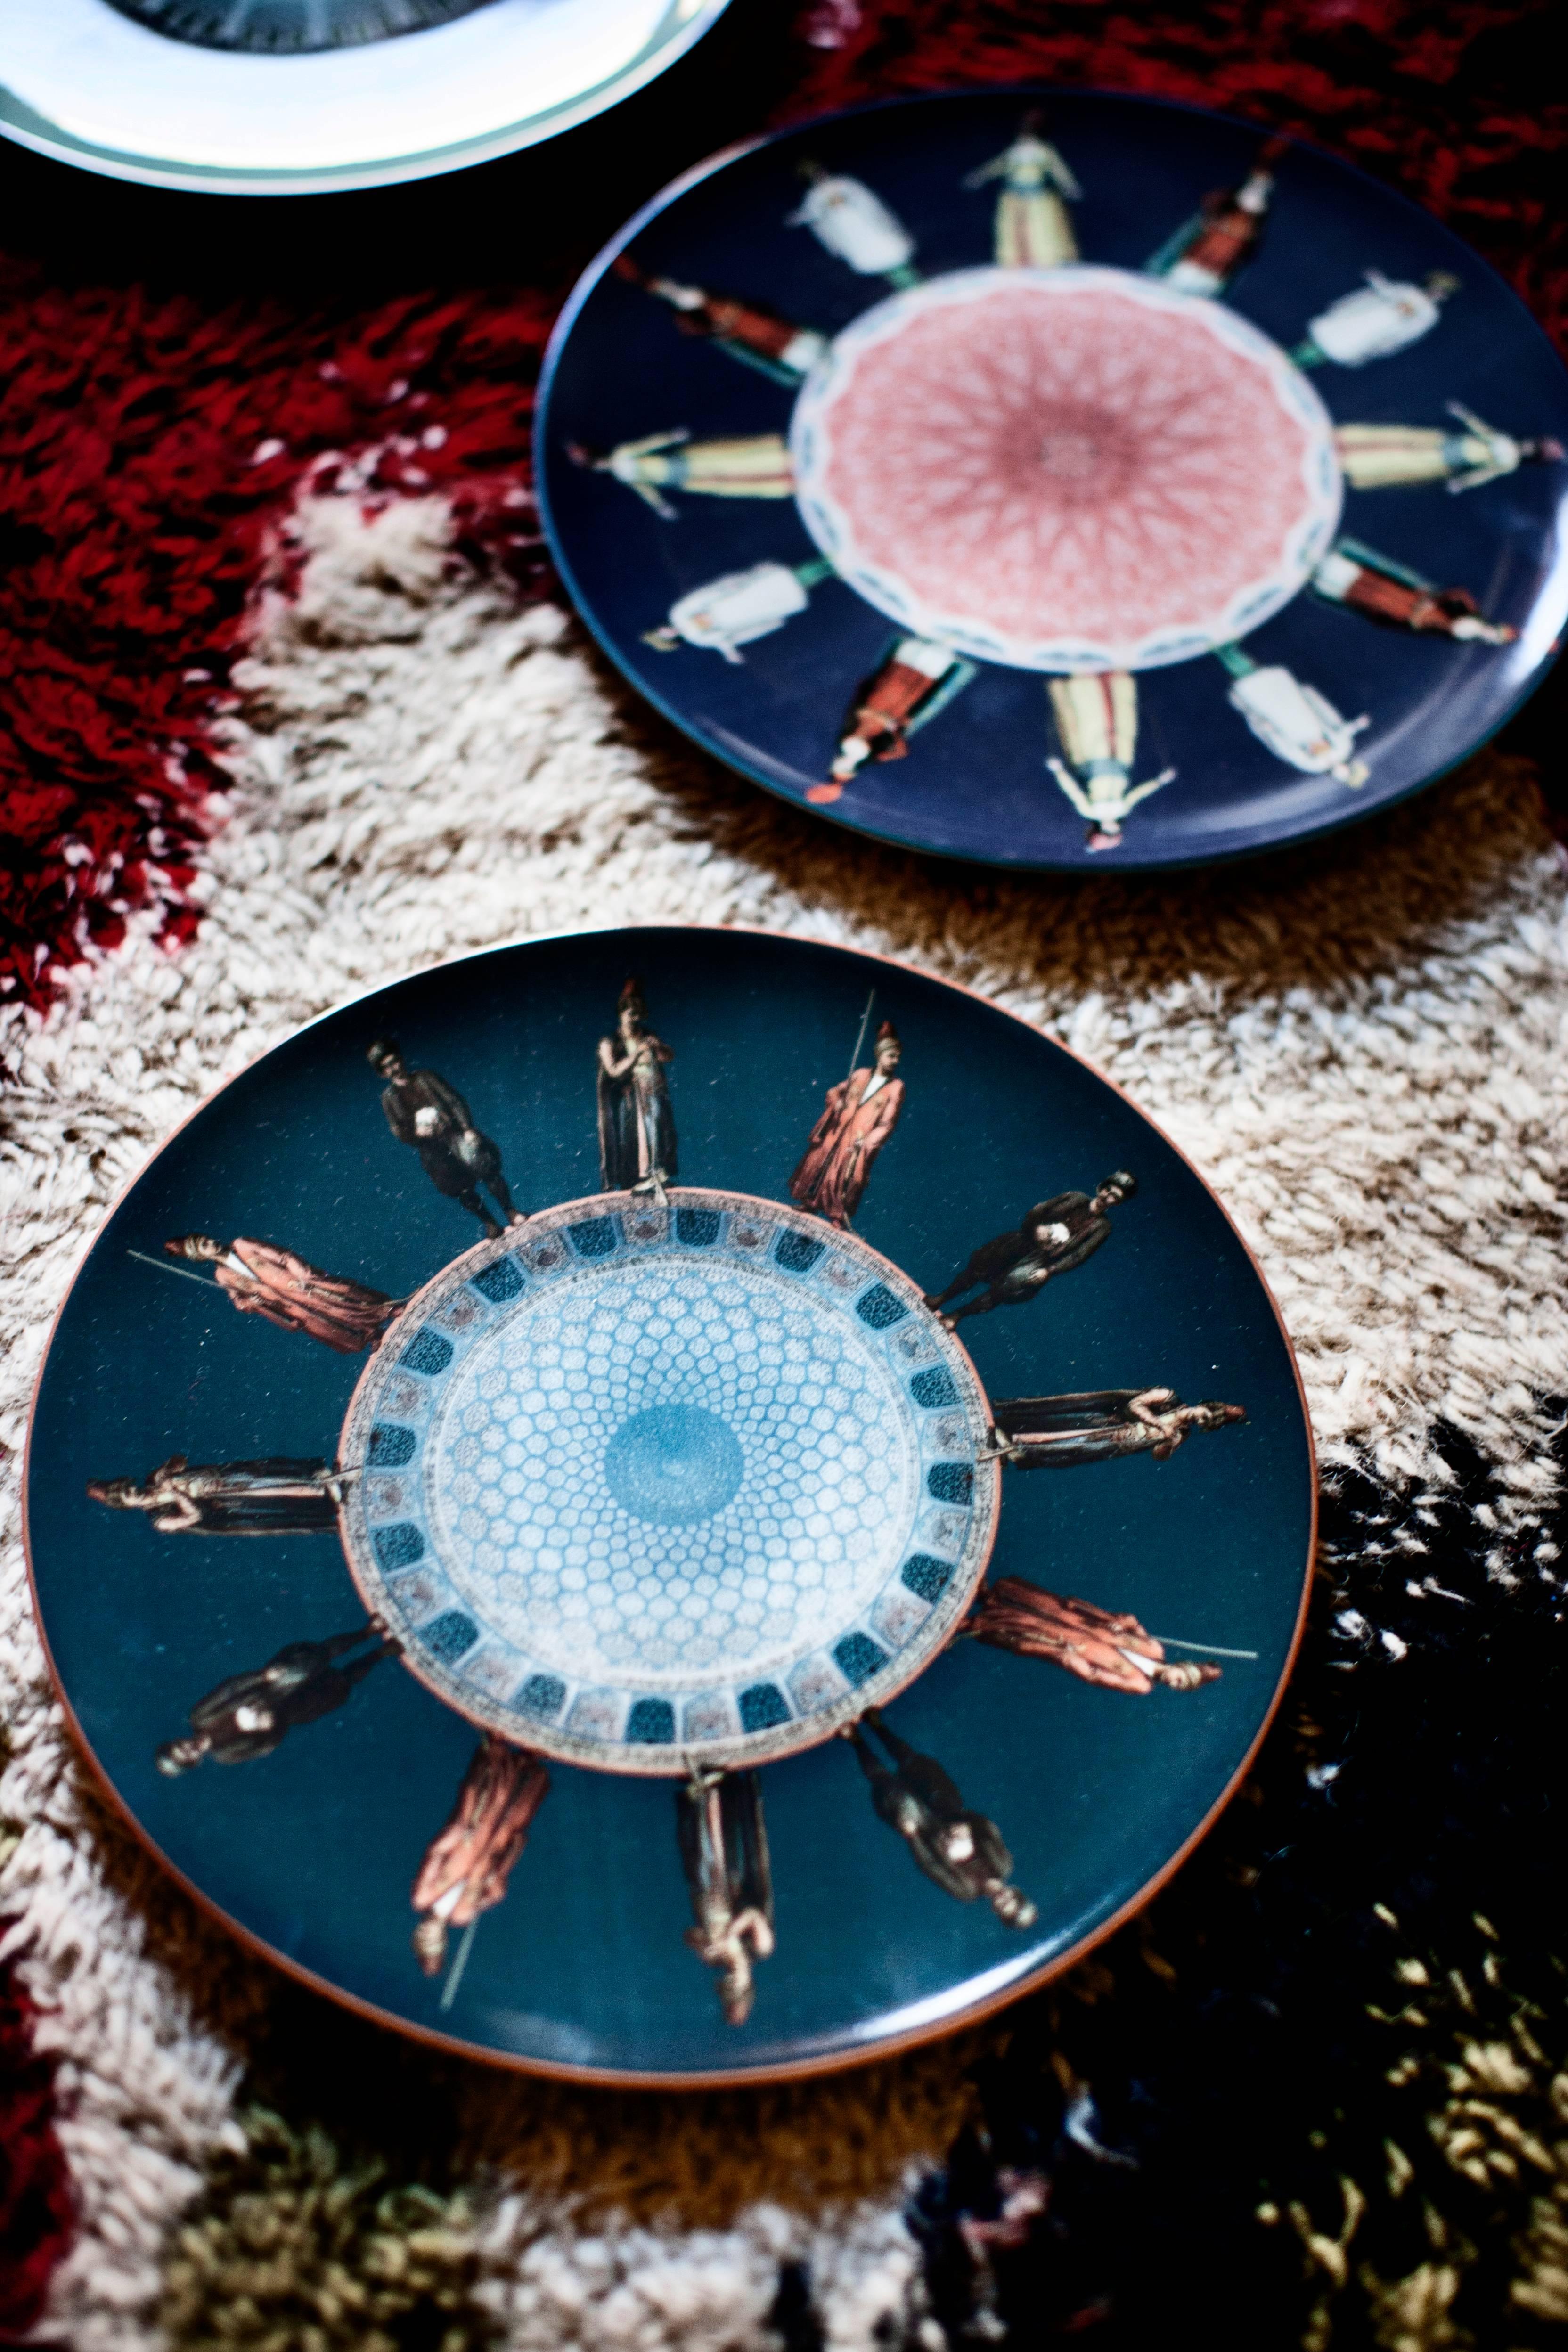 Beautiful Soldati porcelain dinner plate by Vito Nesta for Les Ottomans will make an elegant statement for your every occasion with a sophisticated Art de la table

Handmade in Italy

Upon request available in a set of three or six plates.